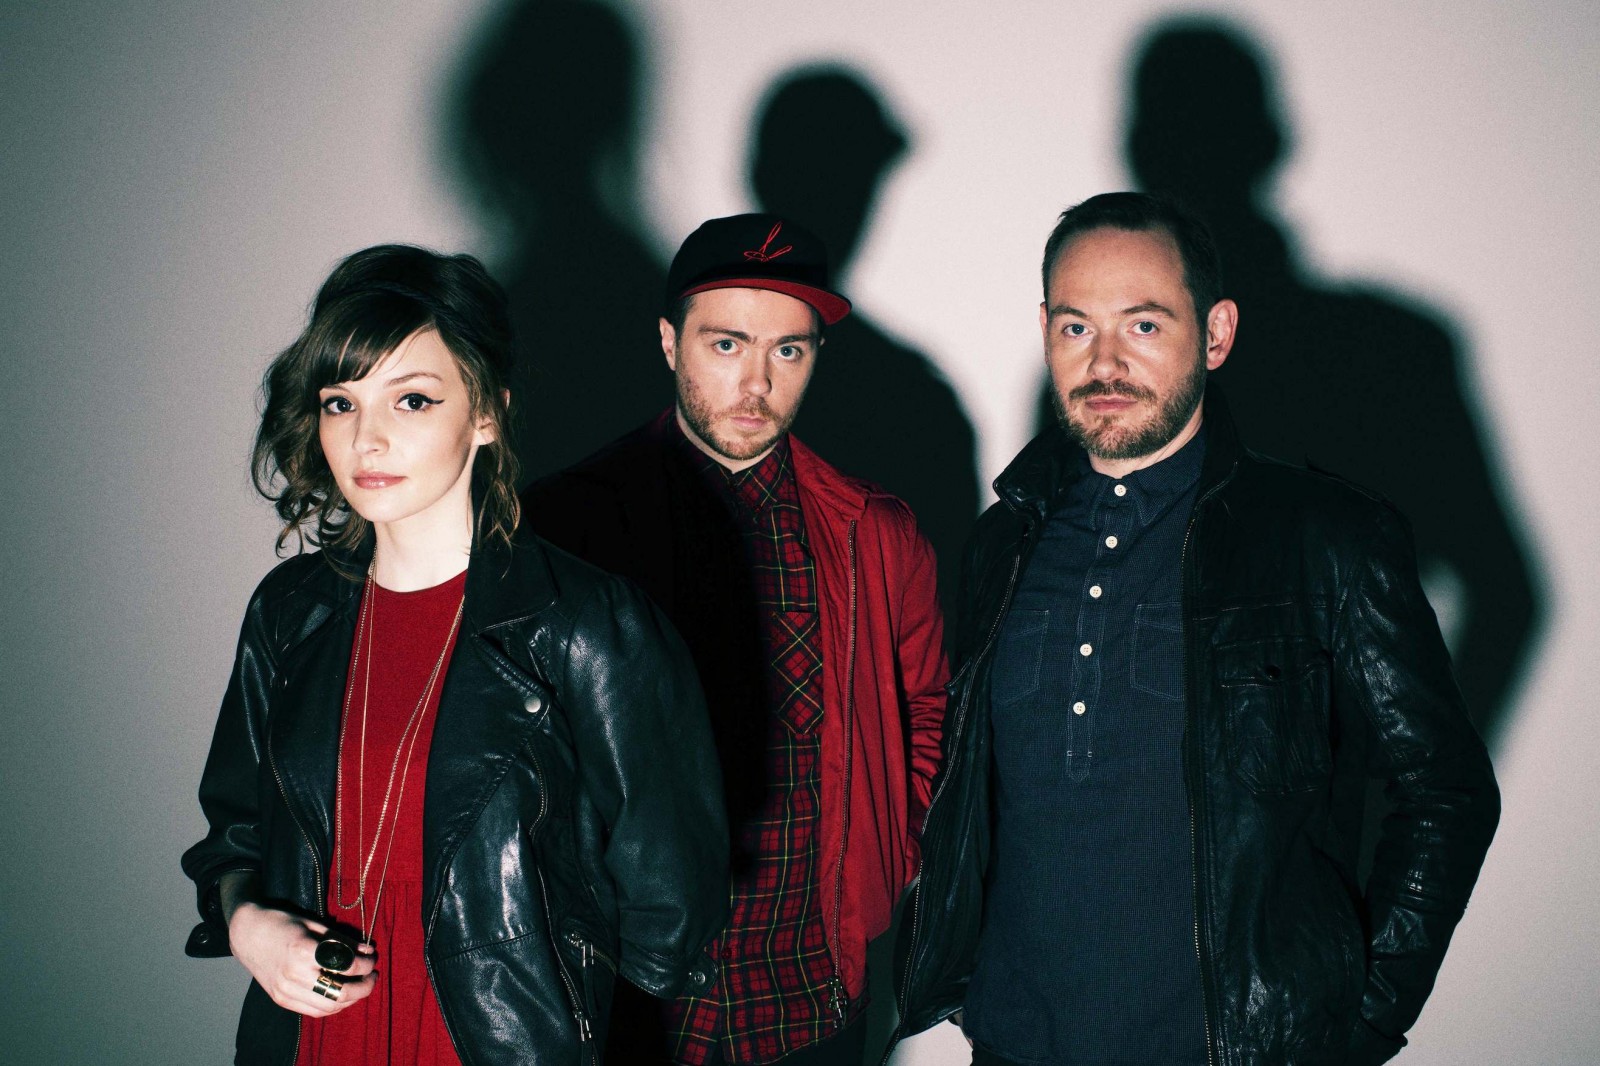 CHVRCHES, Malaysia, Urbanscapes, Kuala Lumpur, Concert, Interview, Lauren Mayberry, Iain Cook, Martin Doherty